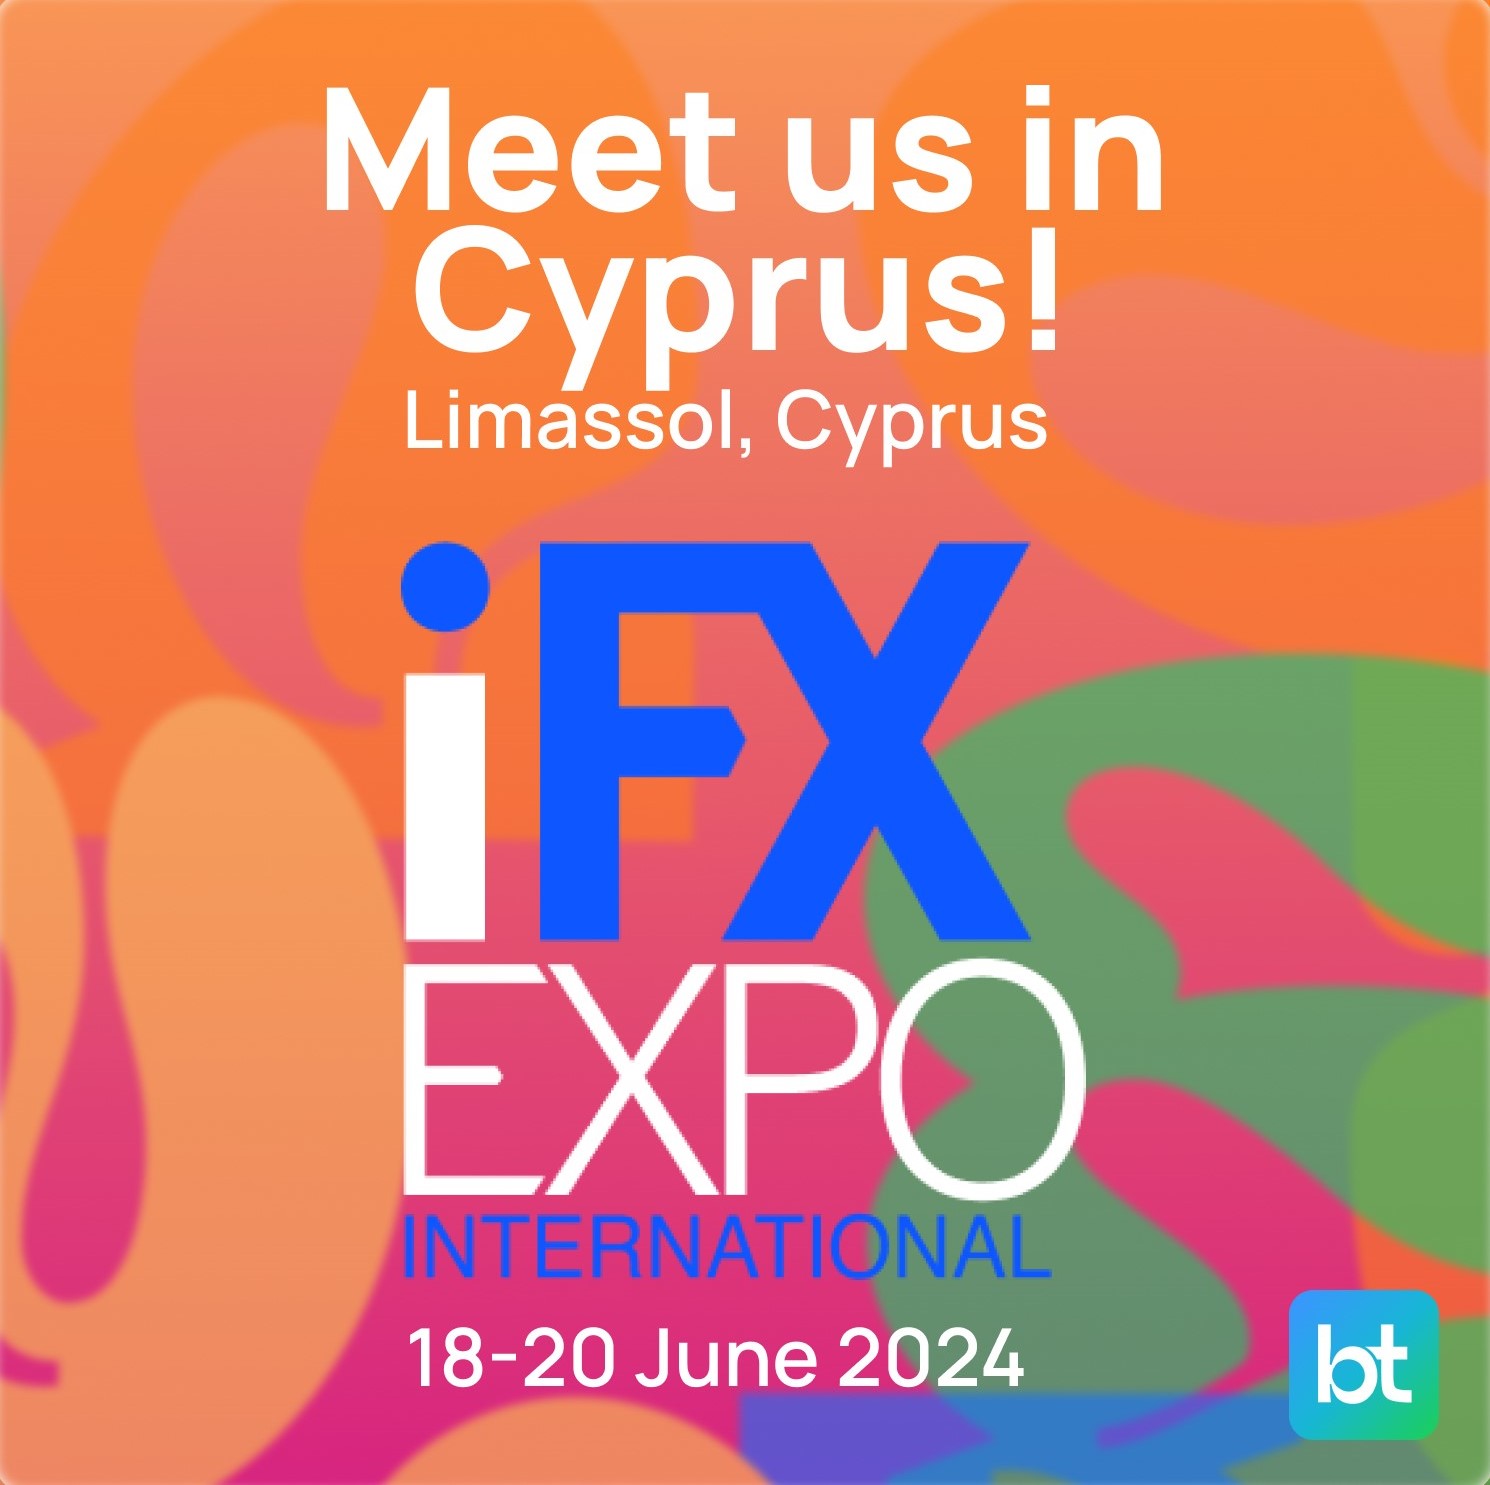 IFX EXPO. We will be there